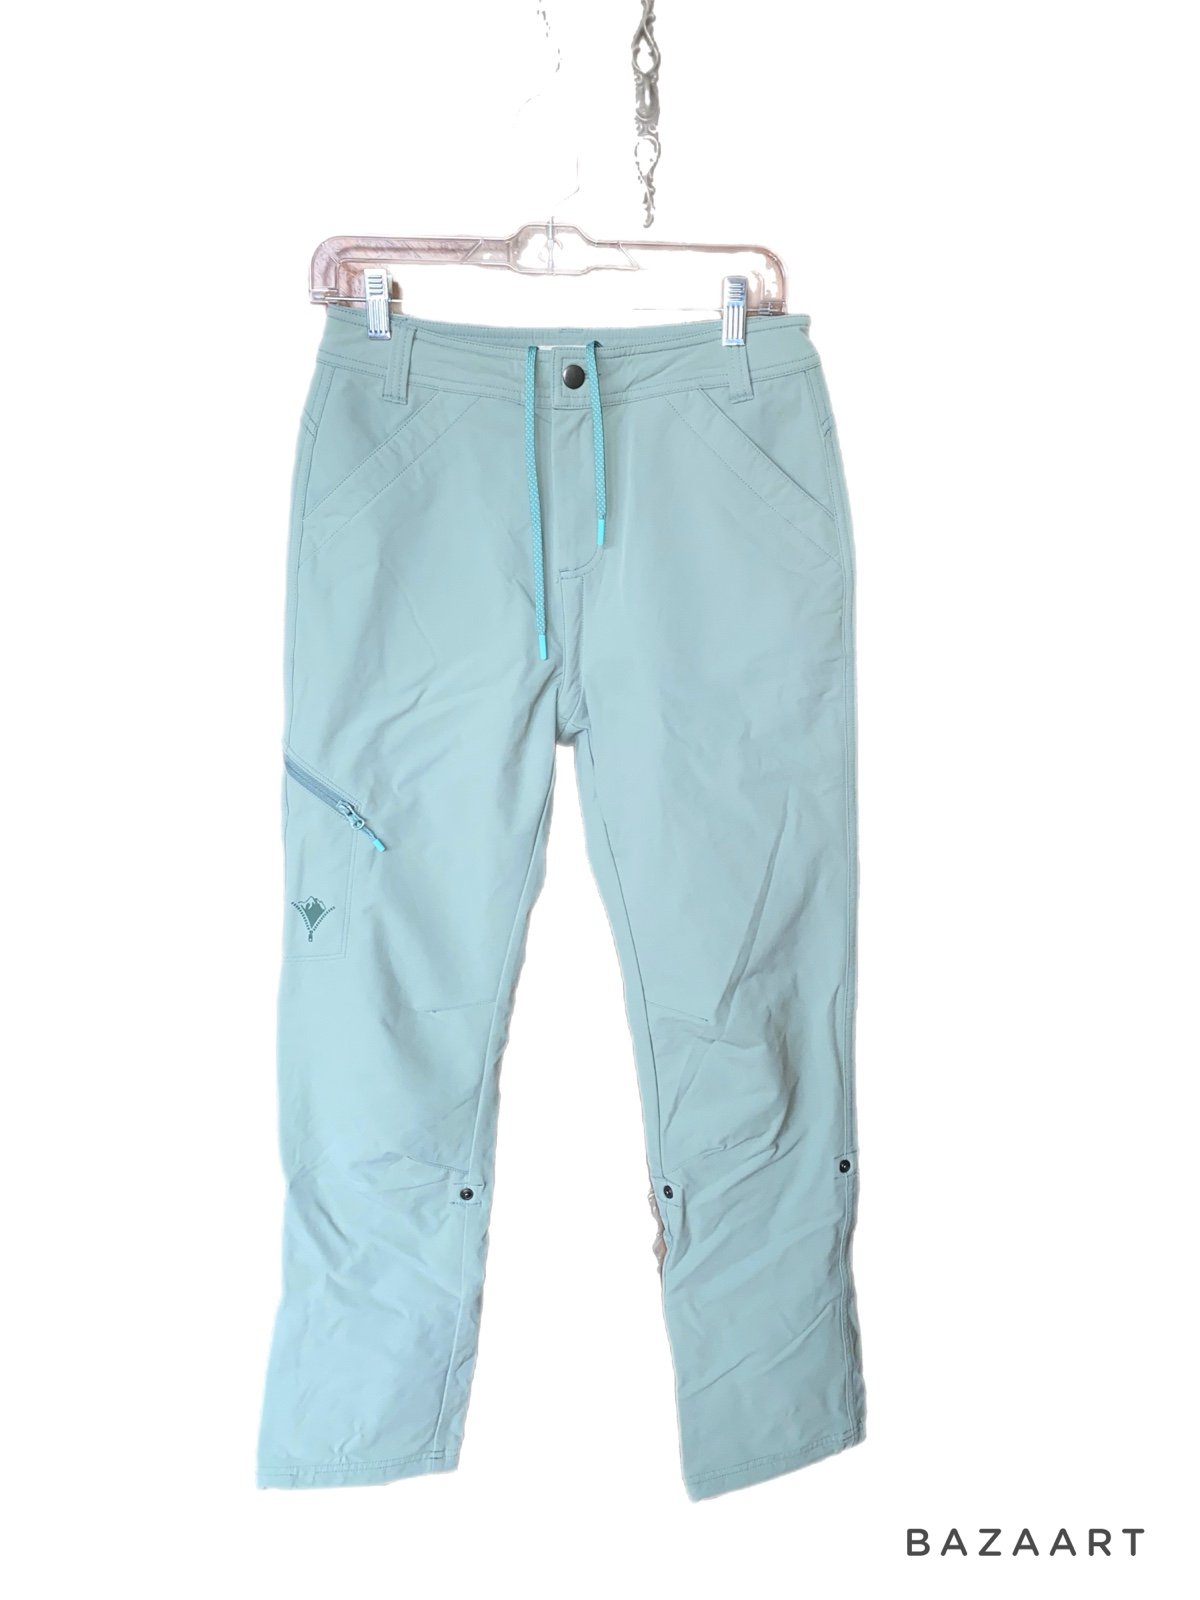 where to buy  Gnara~ SheFly Go There hiking pants pAbJ5